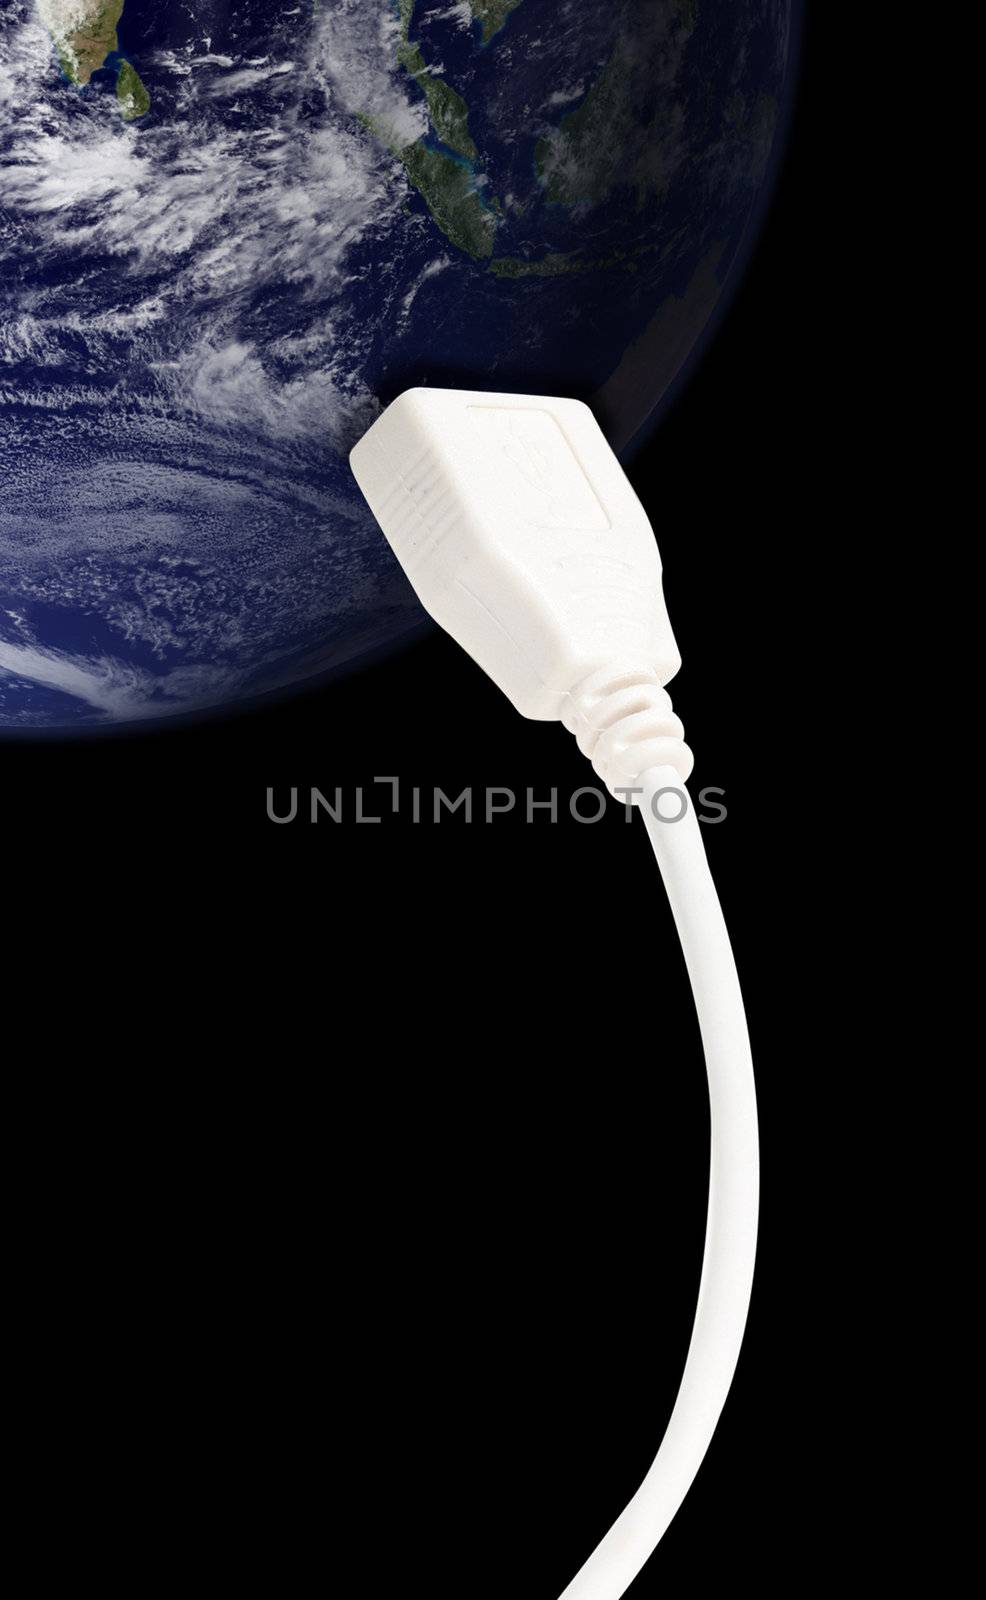 Connecting the world with a USB plug